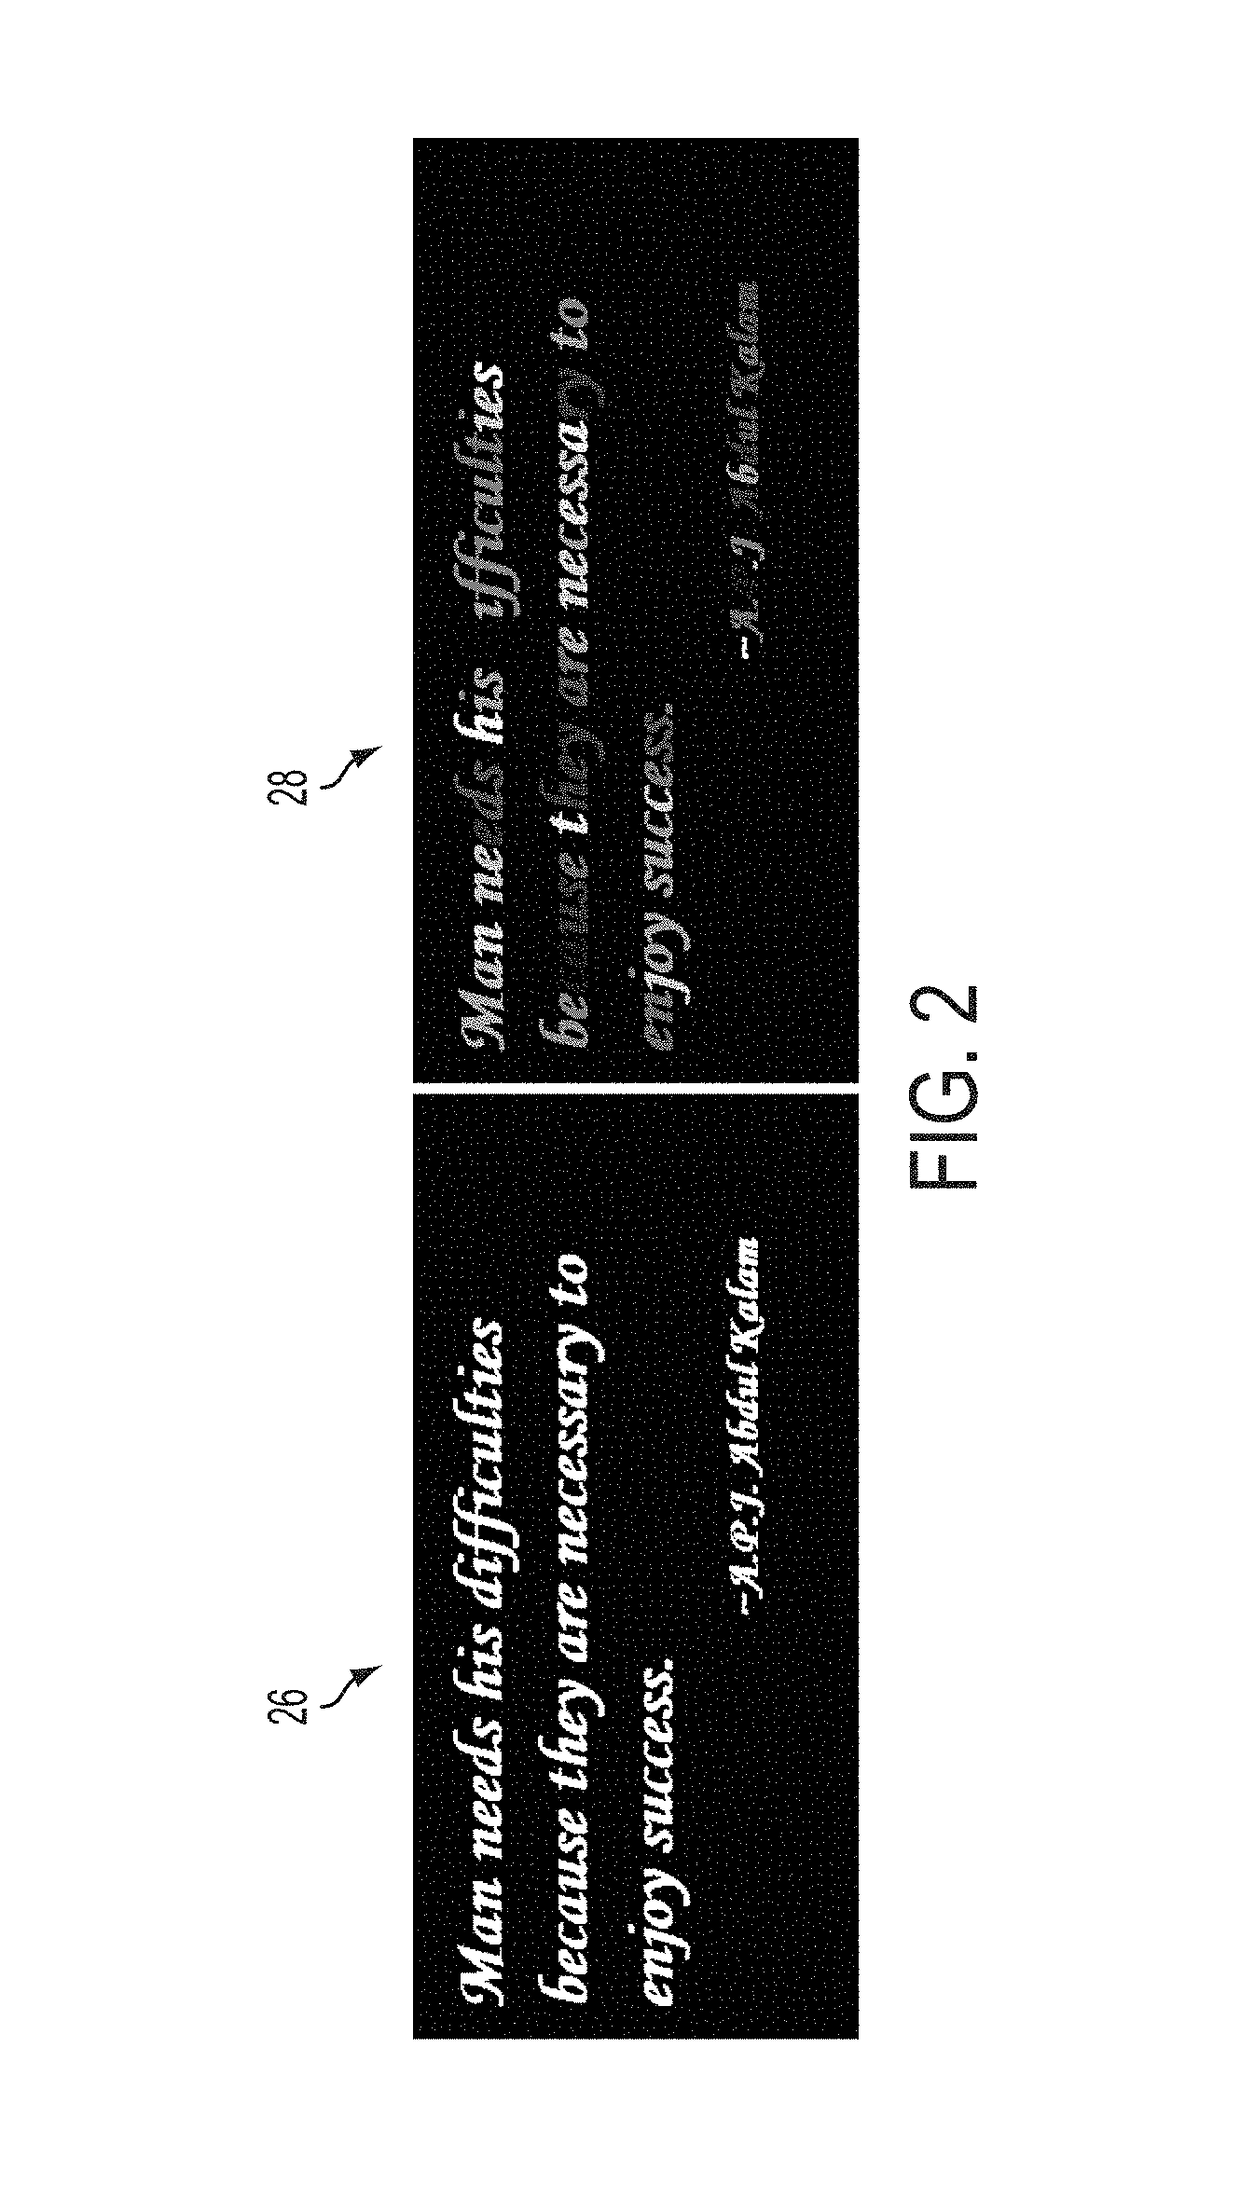 Adaptive selection of rendering intent for negative text embedded with image objects